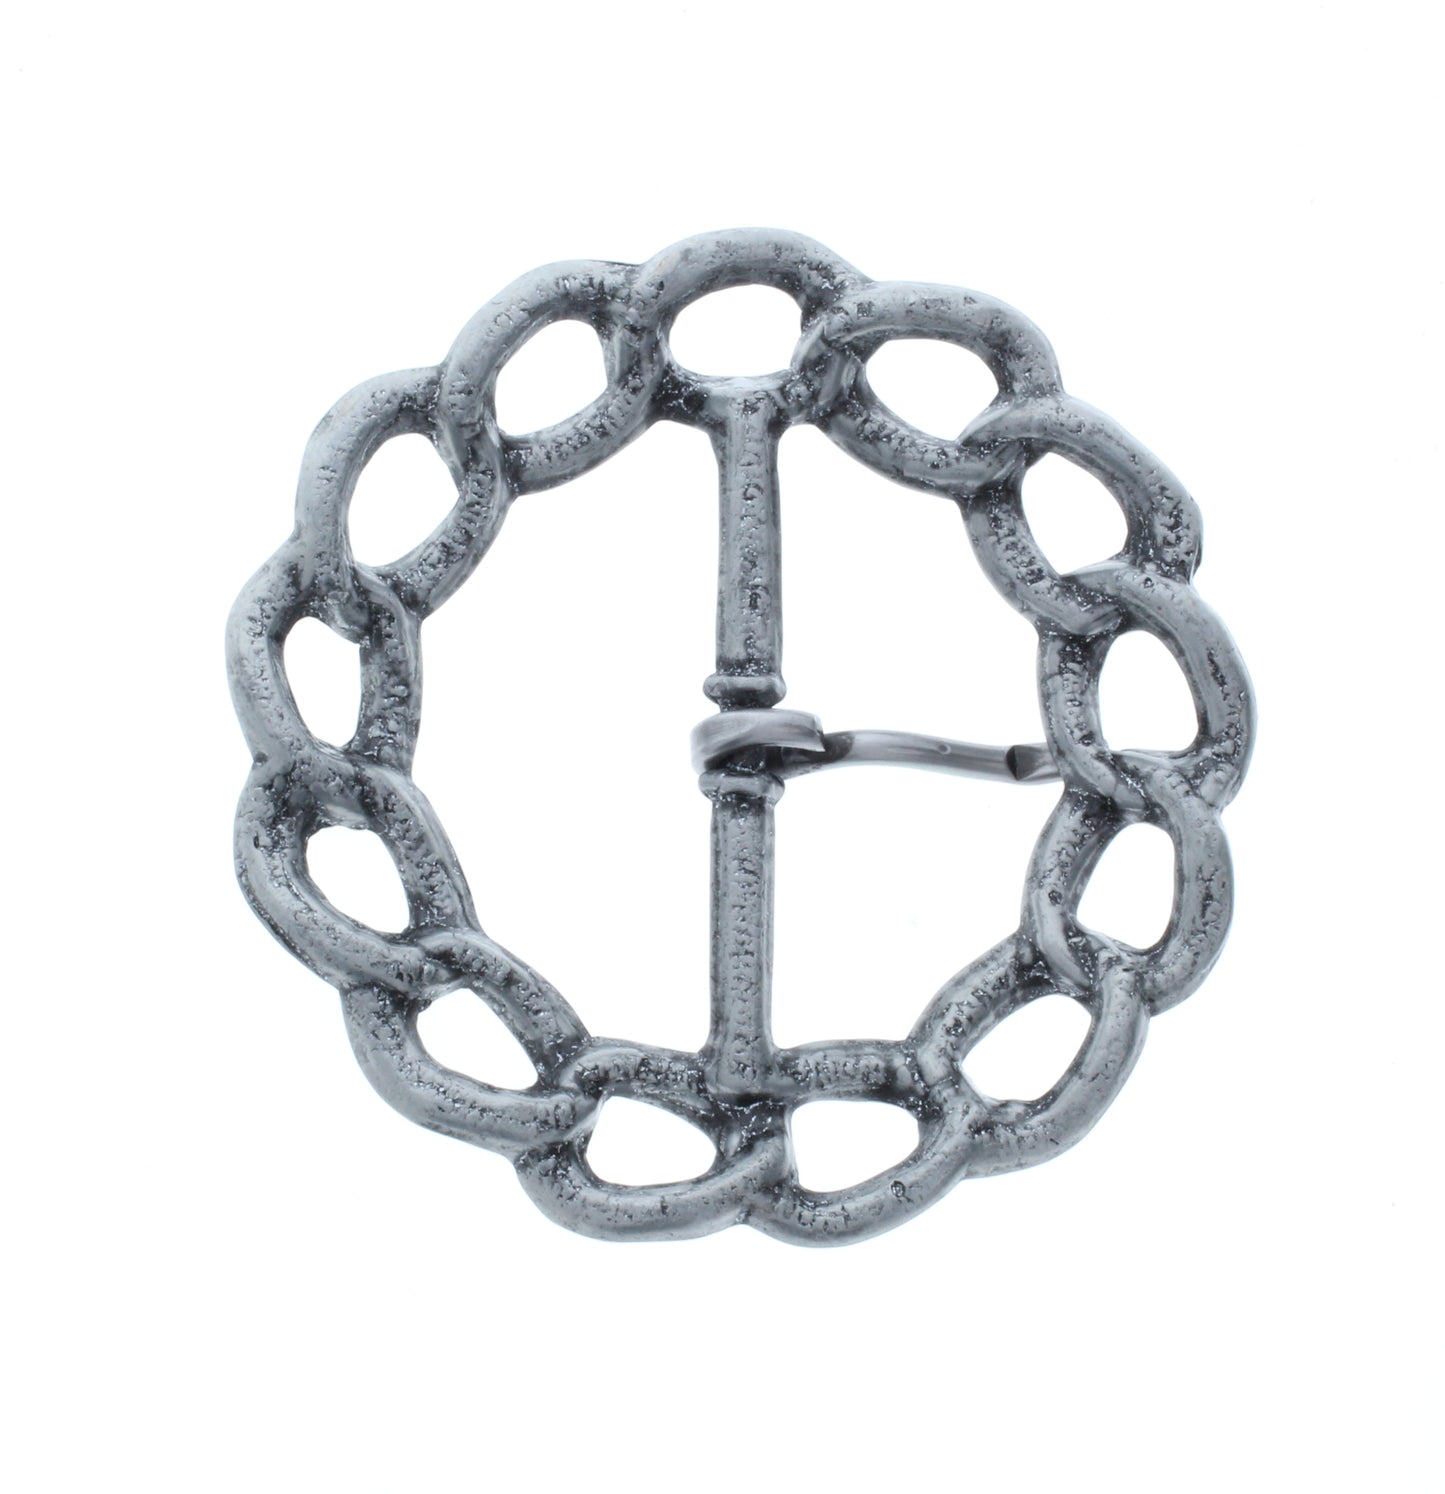 Round Double Chain Buckle, Antique Silver, each